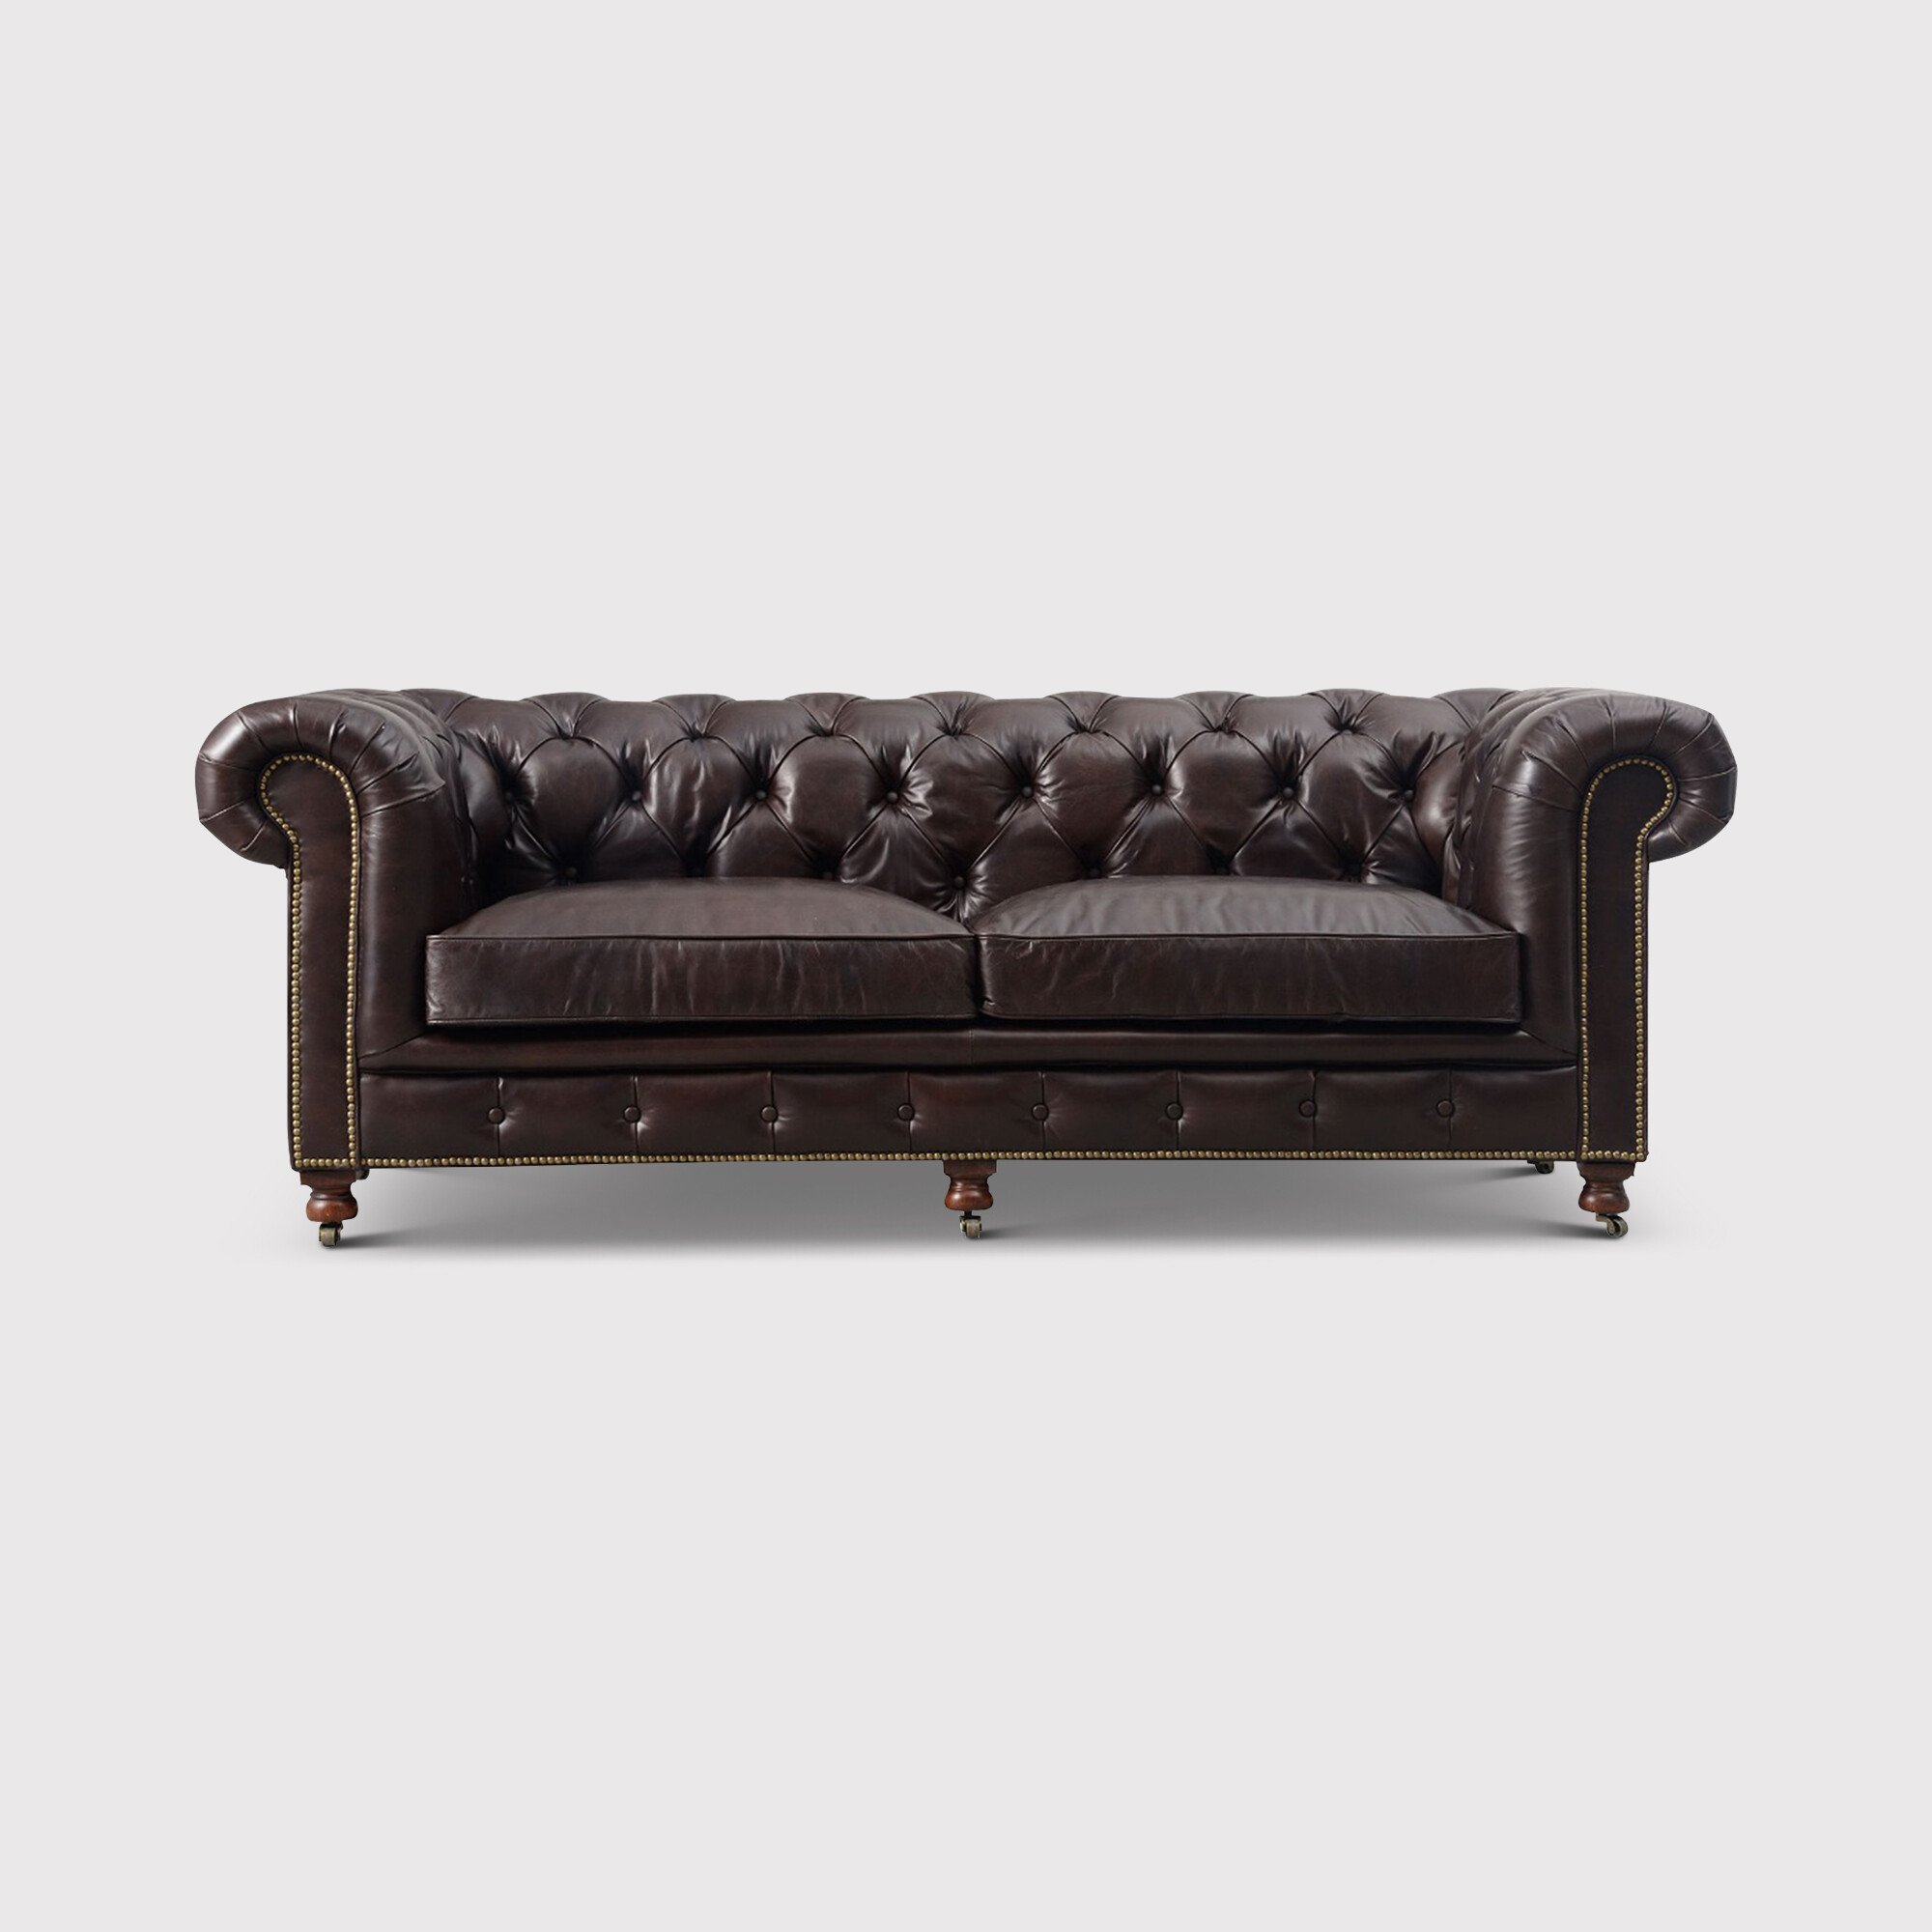 Asquith 2.5 Seater Chesterfield Sofa, Brown Leather | Barker & Stonehouse